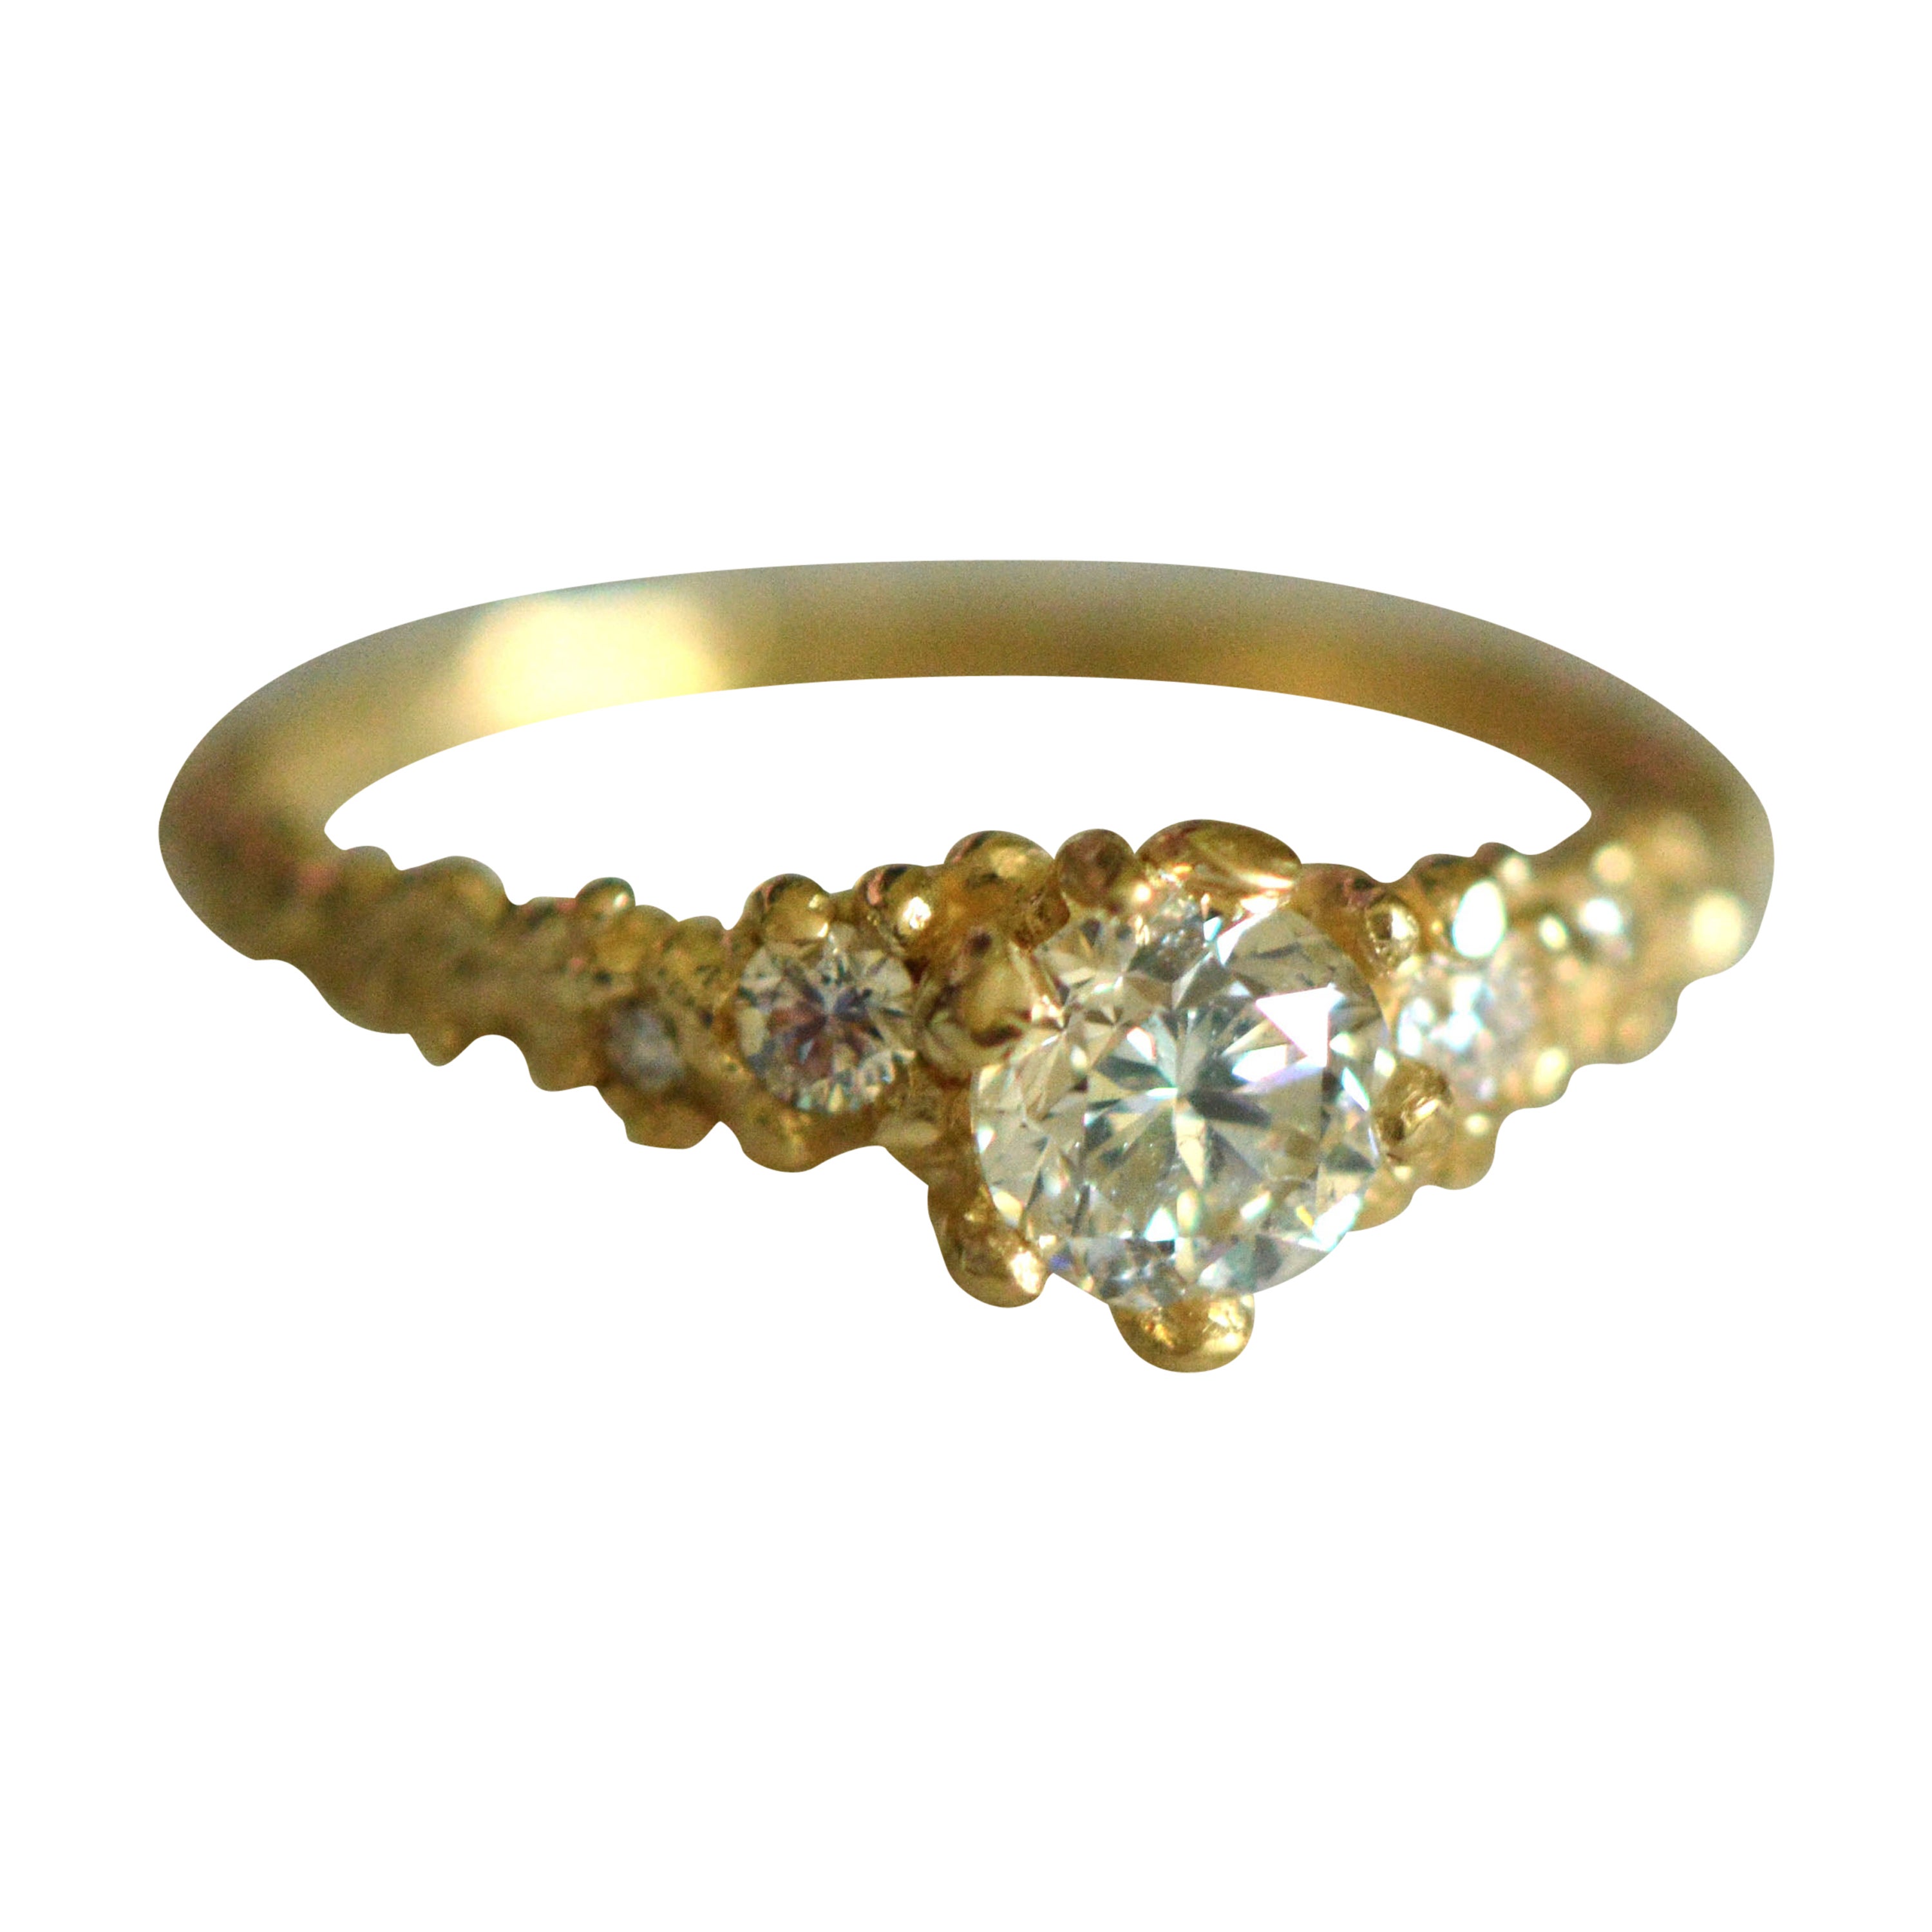 Solid 18 Carat Gold Earth Diamond Ring by Lucy Stopes-Roe For Sale